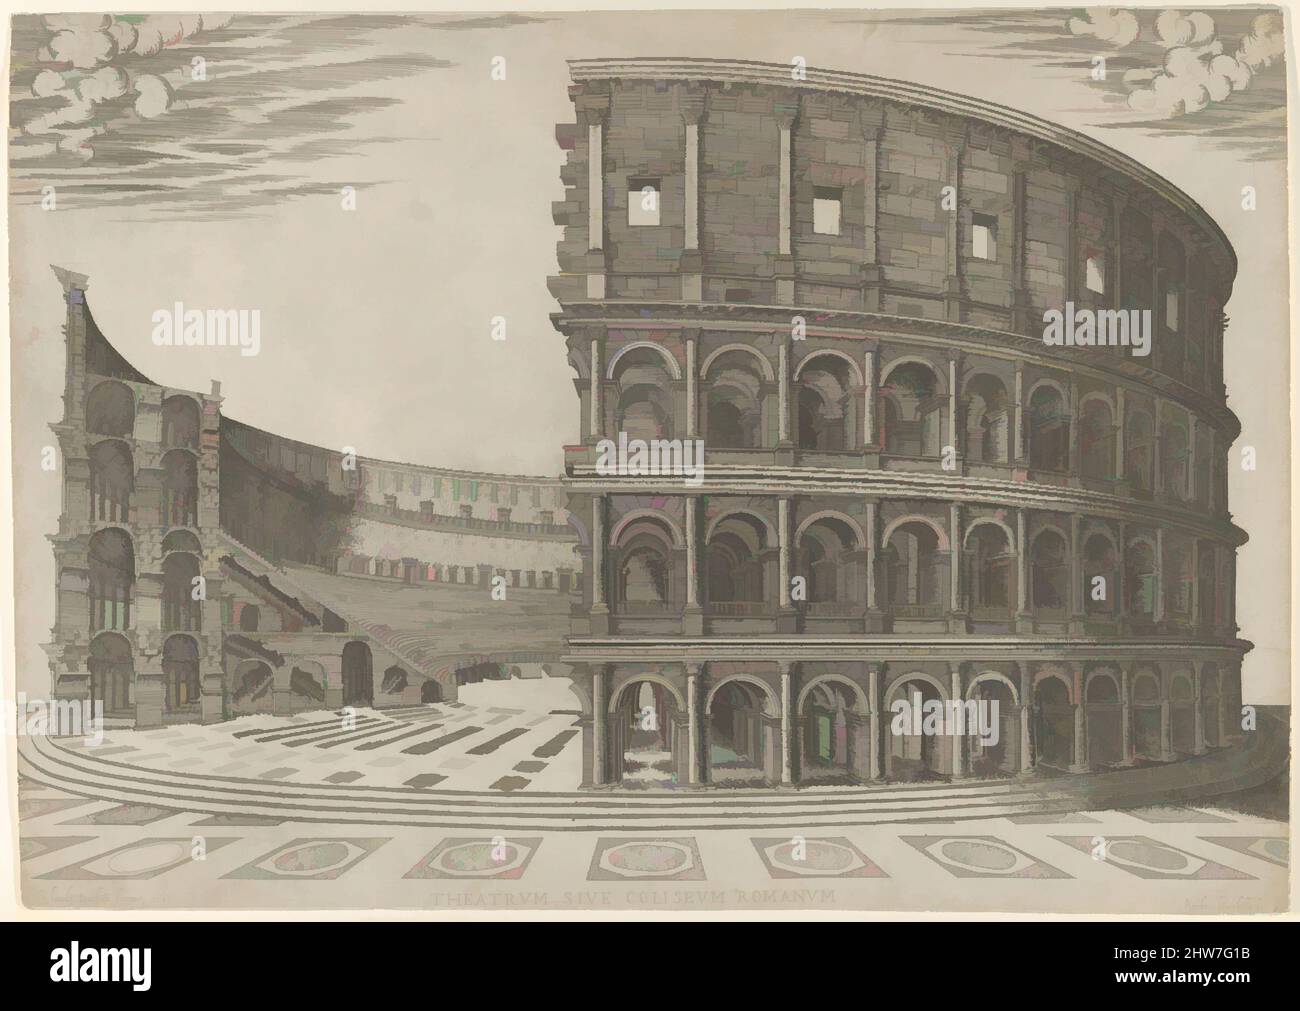 Art inspired by Section and elevation of the Colosseum in Rome, 1581, Etching, sheet: 15 1/4 x 21 5/8 in. (38.7 x 55 cm), Prints, Giovanni Ambrogio Brambilla (Italian, active Rome, 1575–99, Classic works modernized by Artotop with a splash of modernity. Shapes, color and value, eye-catching visual impact on art. Emotions through freedom of artworks in a contemporary way. A timeless message pursuing a wildly creative new direction. Artists turning to the digital medium and creating the Artotop NFT Stock Photo